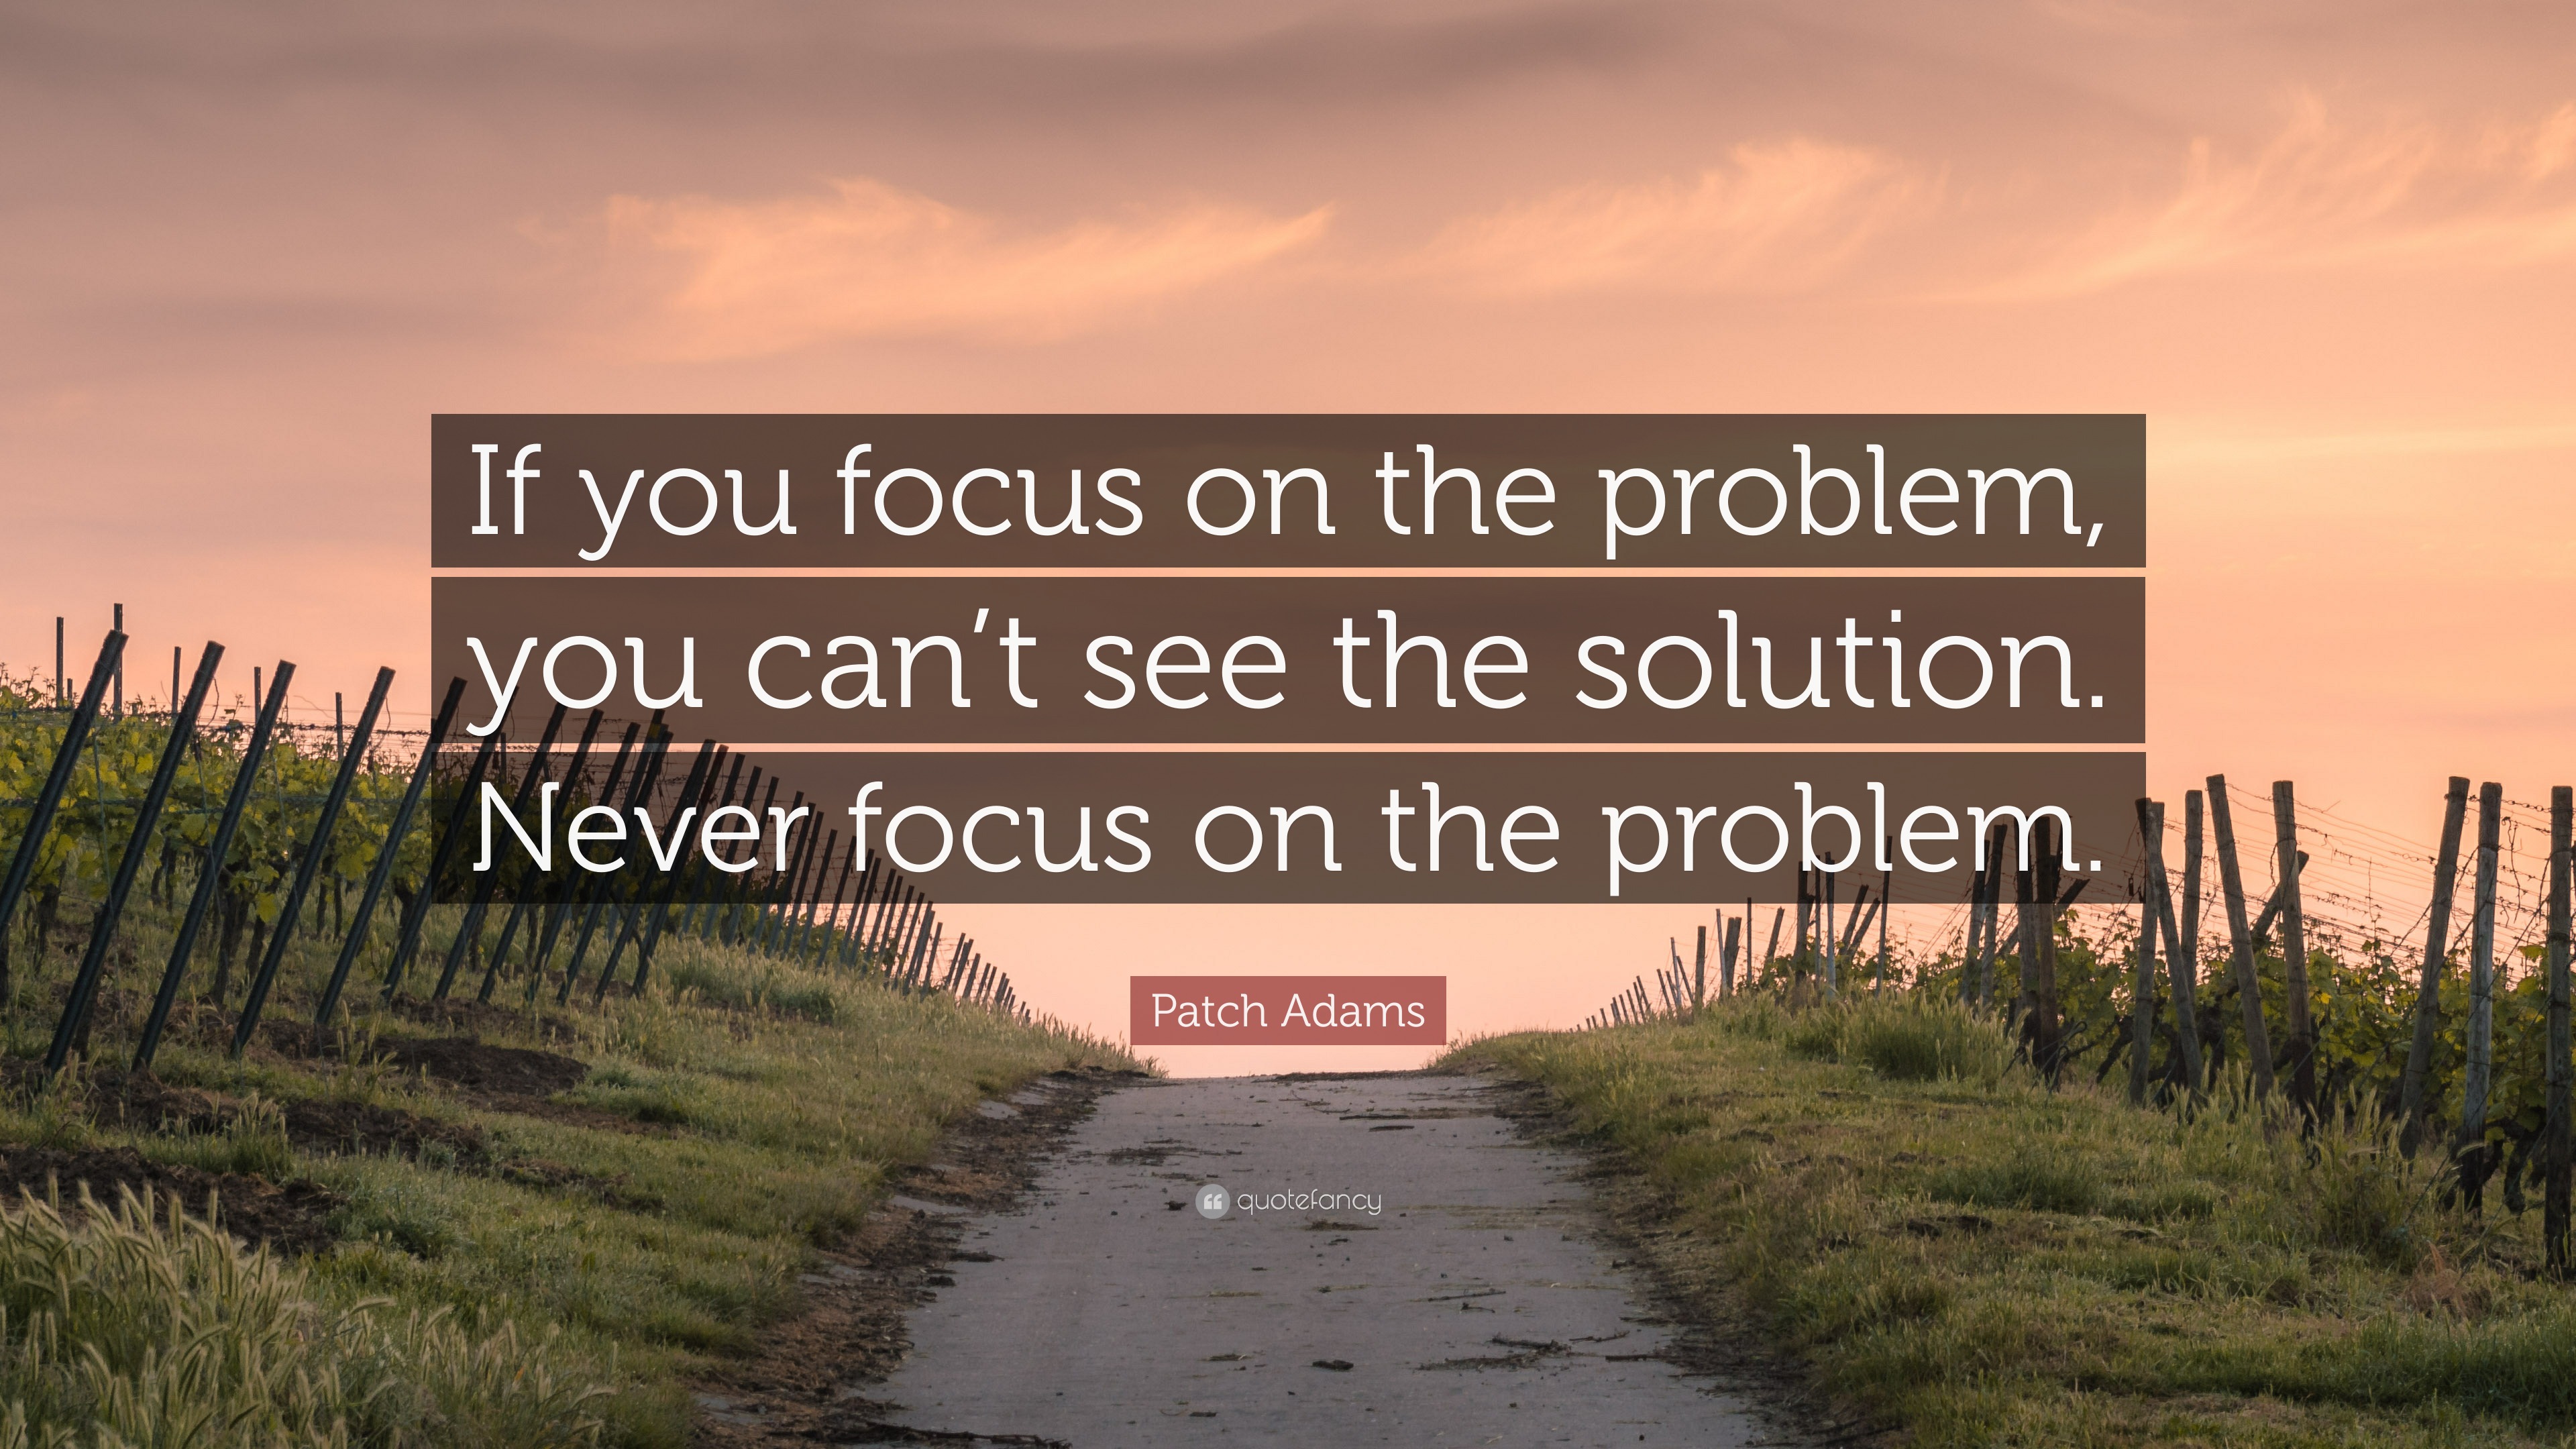 Patch Adams Quote “if You Focus On The Problem You Cant See The